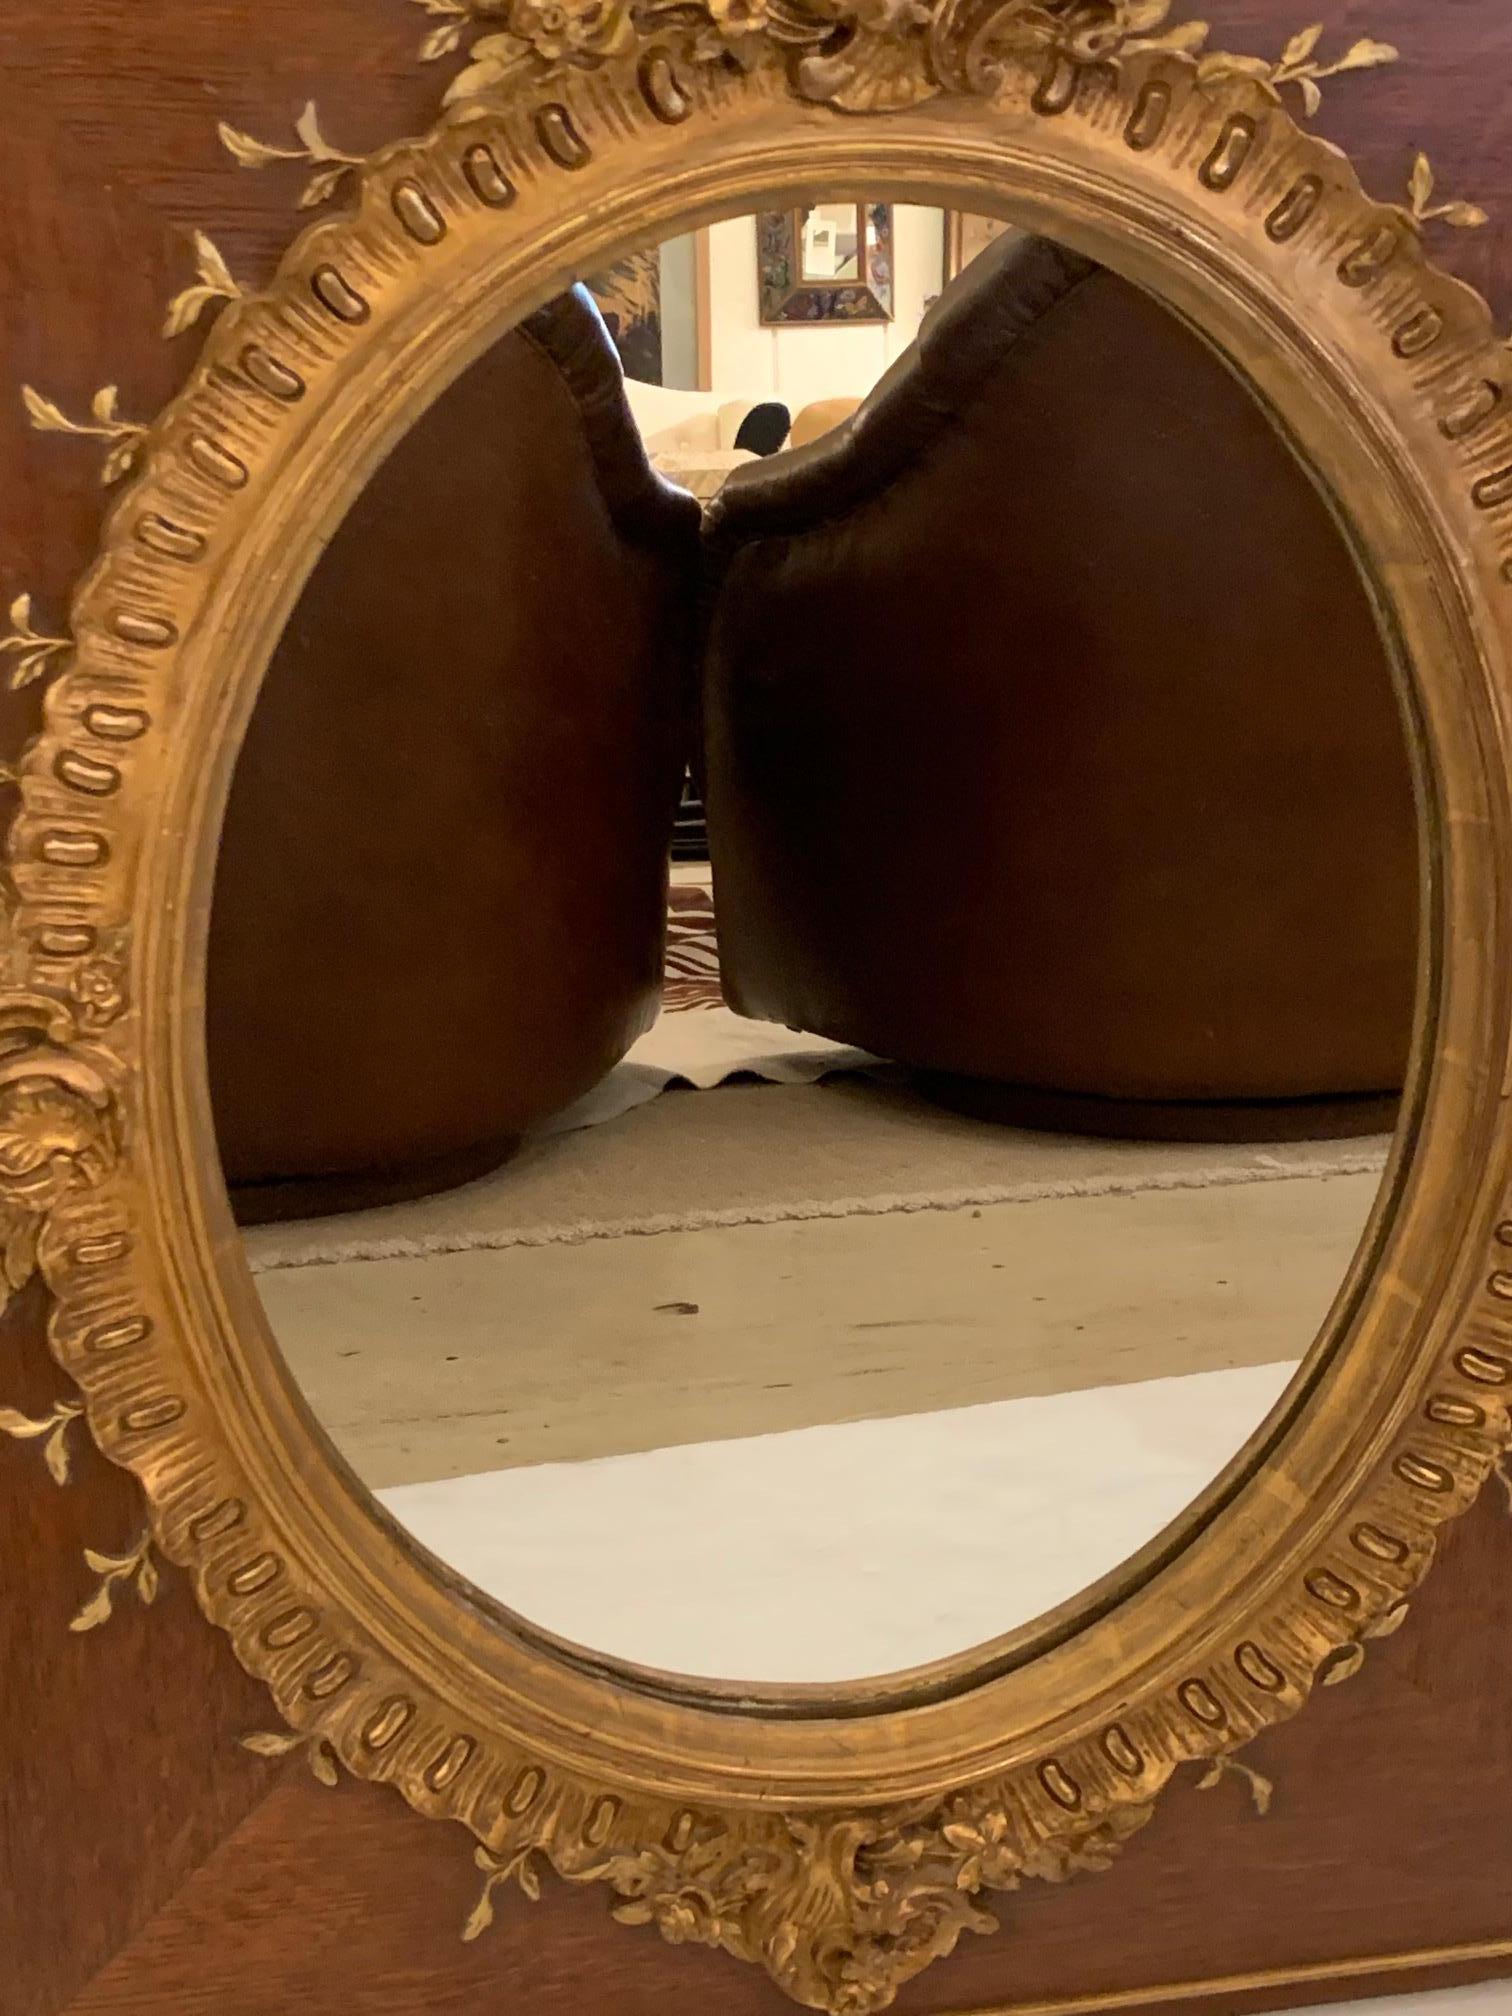 Very unusual vintage mirror having rectangular oak background and central oval giltwood mirror in the foreground. Matching giltwood decoration adorns the periphery of the wood.
Mirror itself measures 19 H x 15 W.